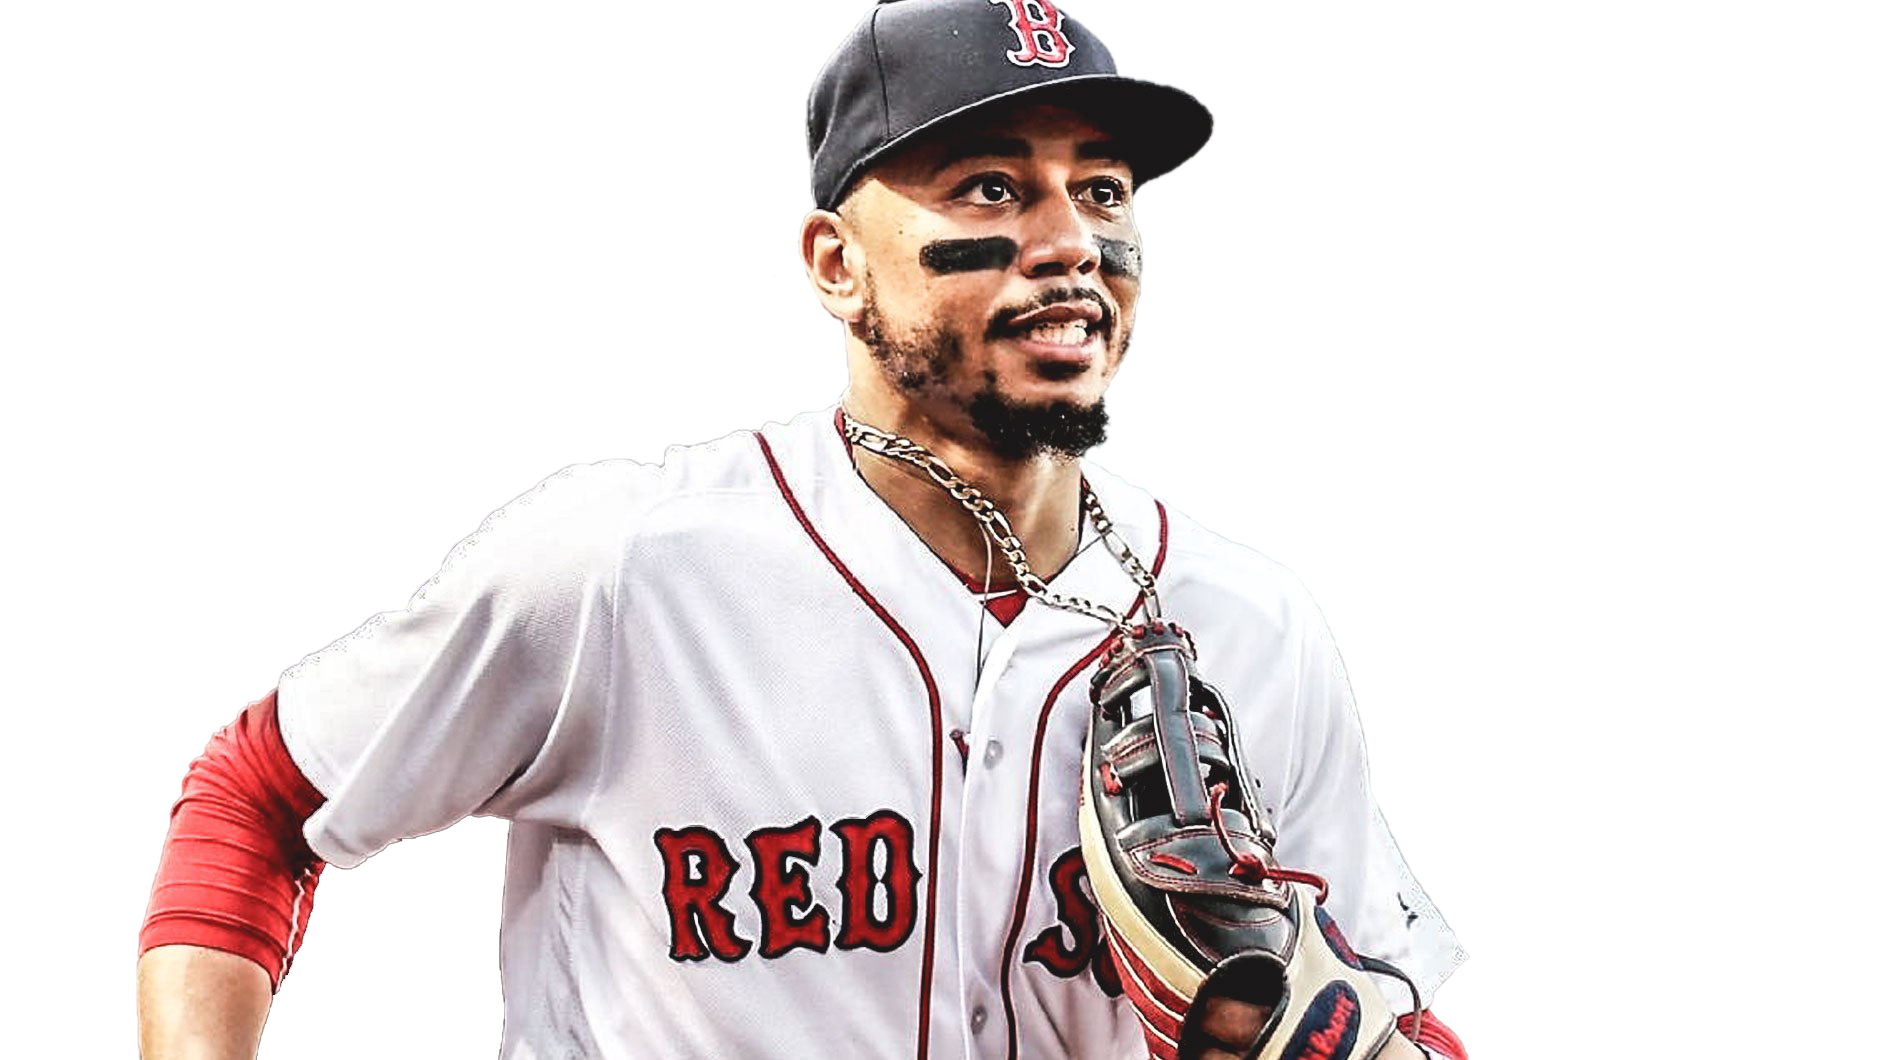 Mookie Betts PNG Background Image